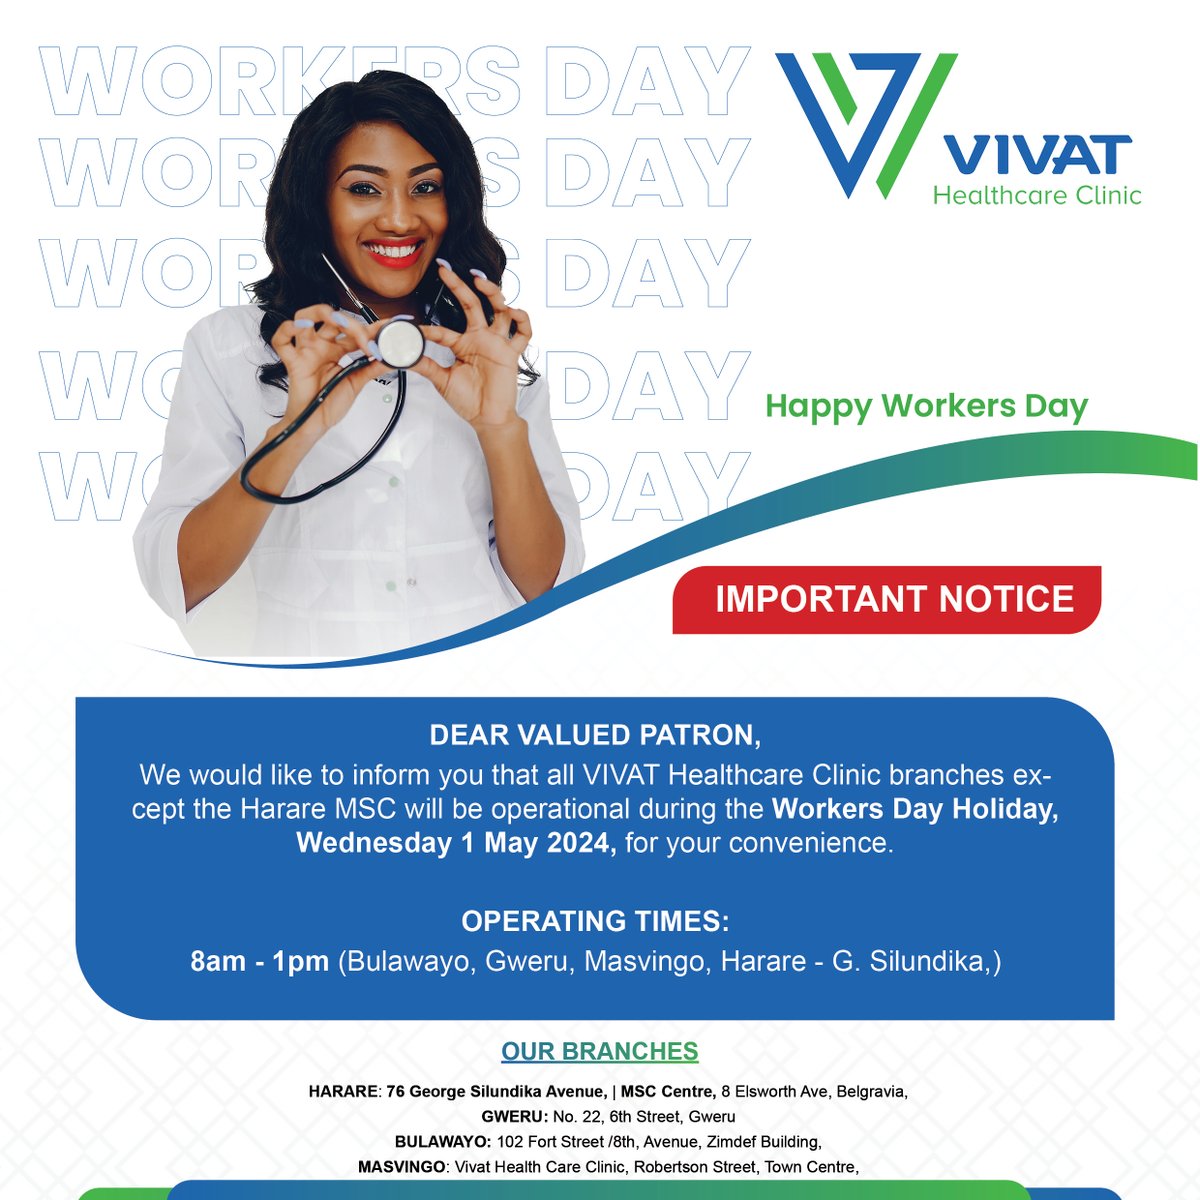 Dear Valued Patron!

We would like to inform you that all VIVAT Healthcare Clinic branches (except Harare MSC) will be operational during the Worker's Day Holiday for your convenience. Happy Worker's Day.

#livehealthy #QualityHealthcareRedefined